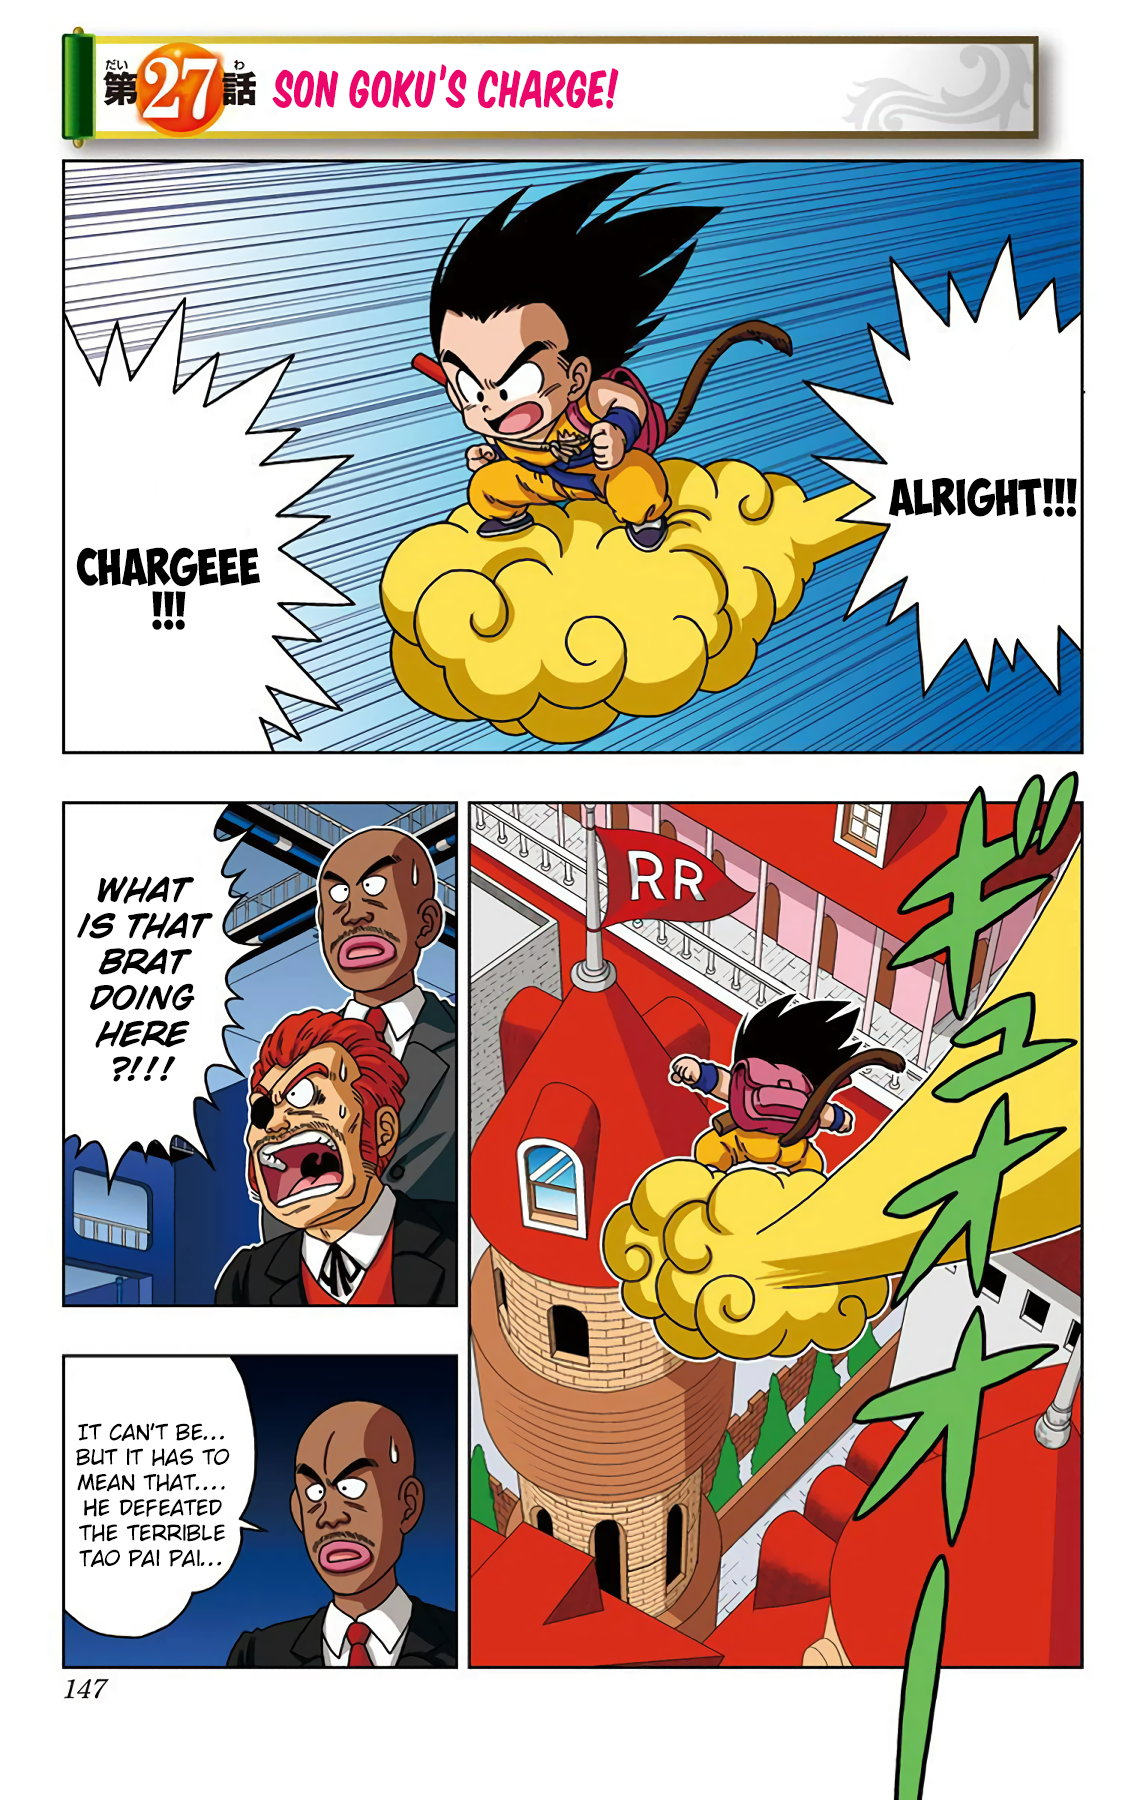 Dragon Ball Sd Vol.3 Chapter 27: Son Goku's Charge! - Picture 1